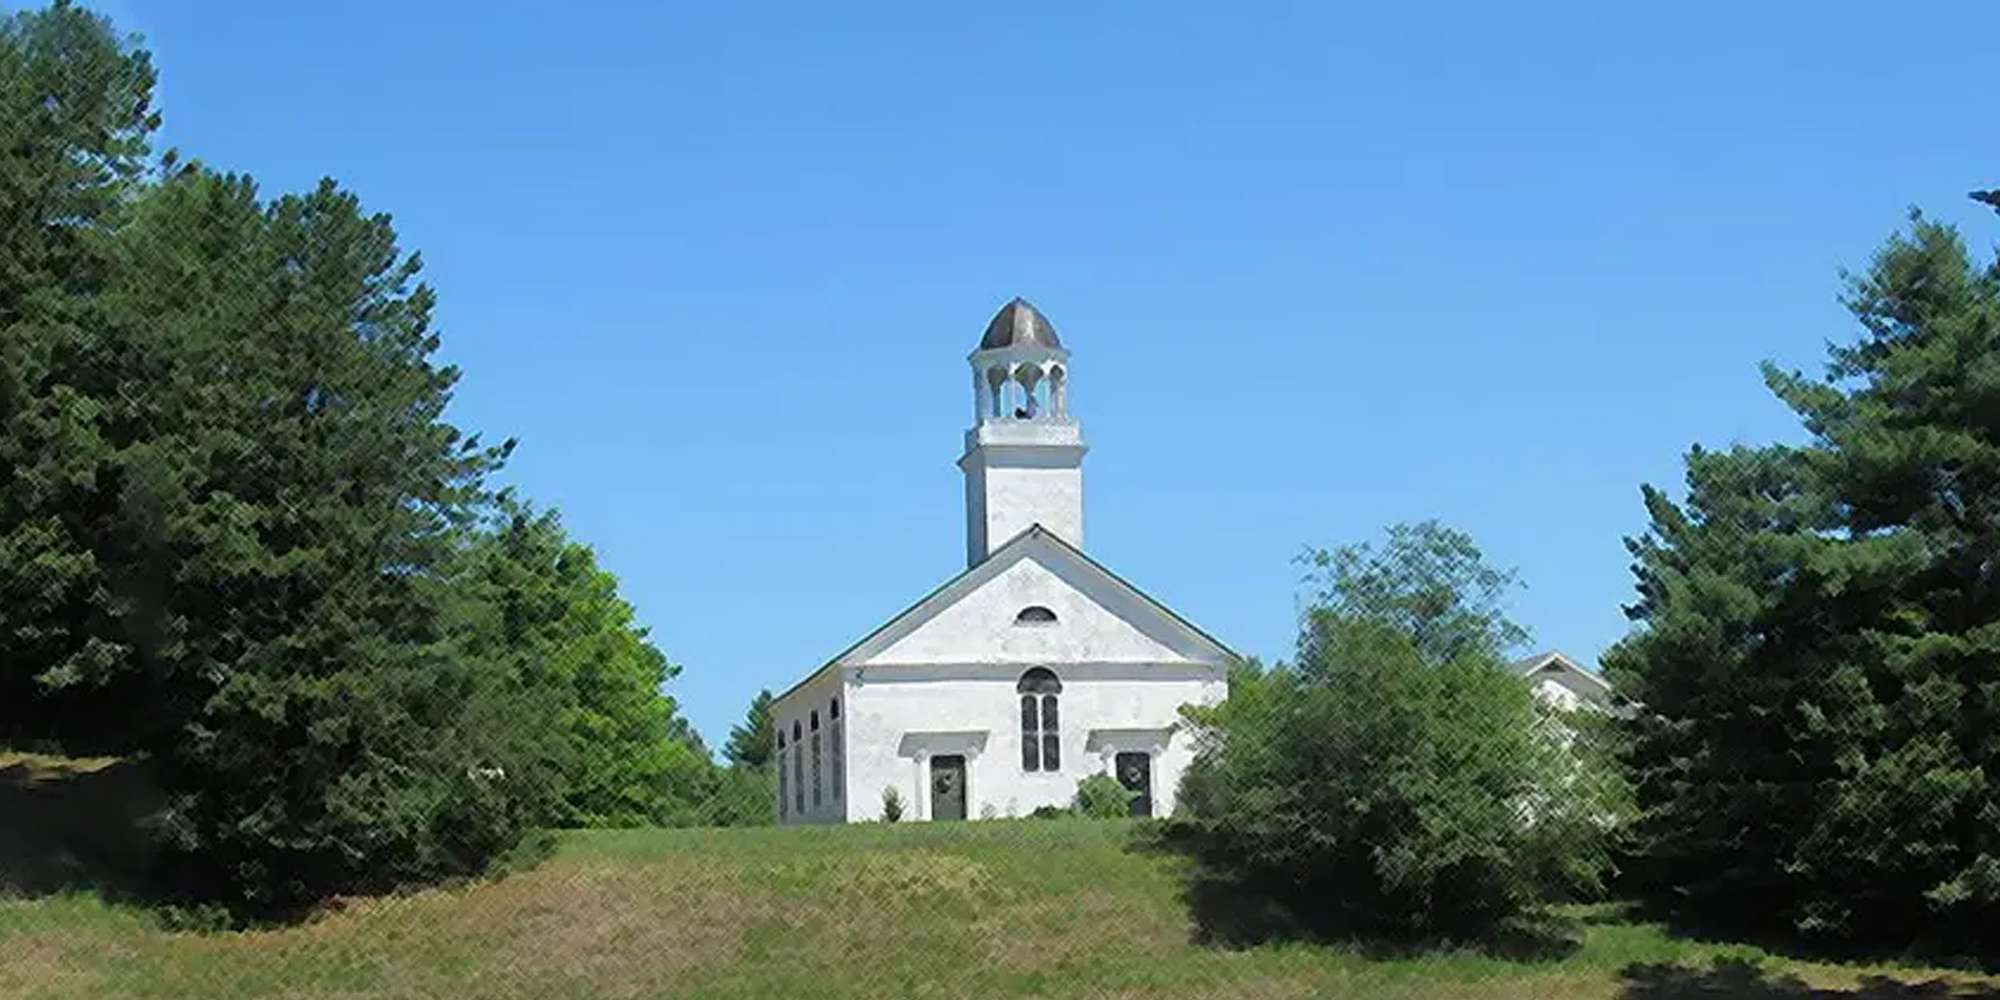 Photo of the Congregational Church in Loudon, New Hampshire